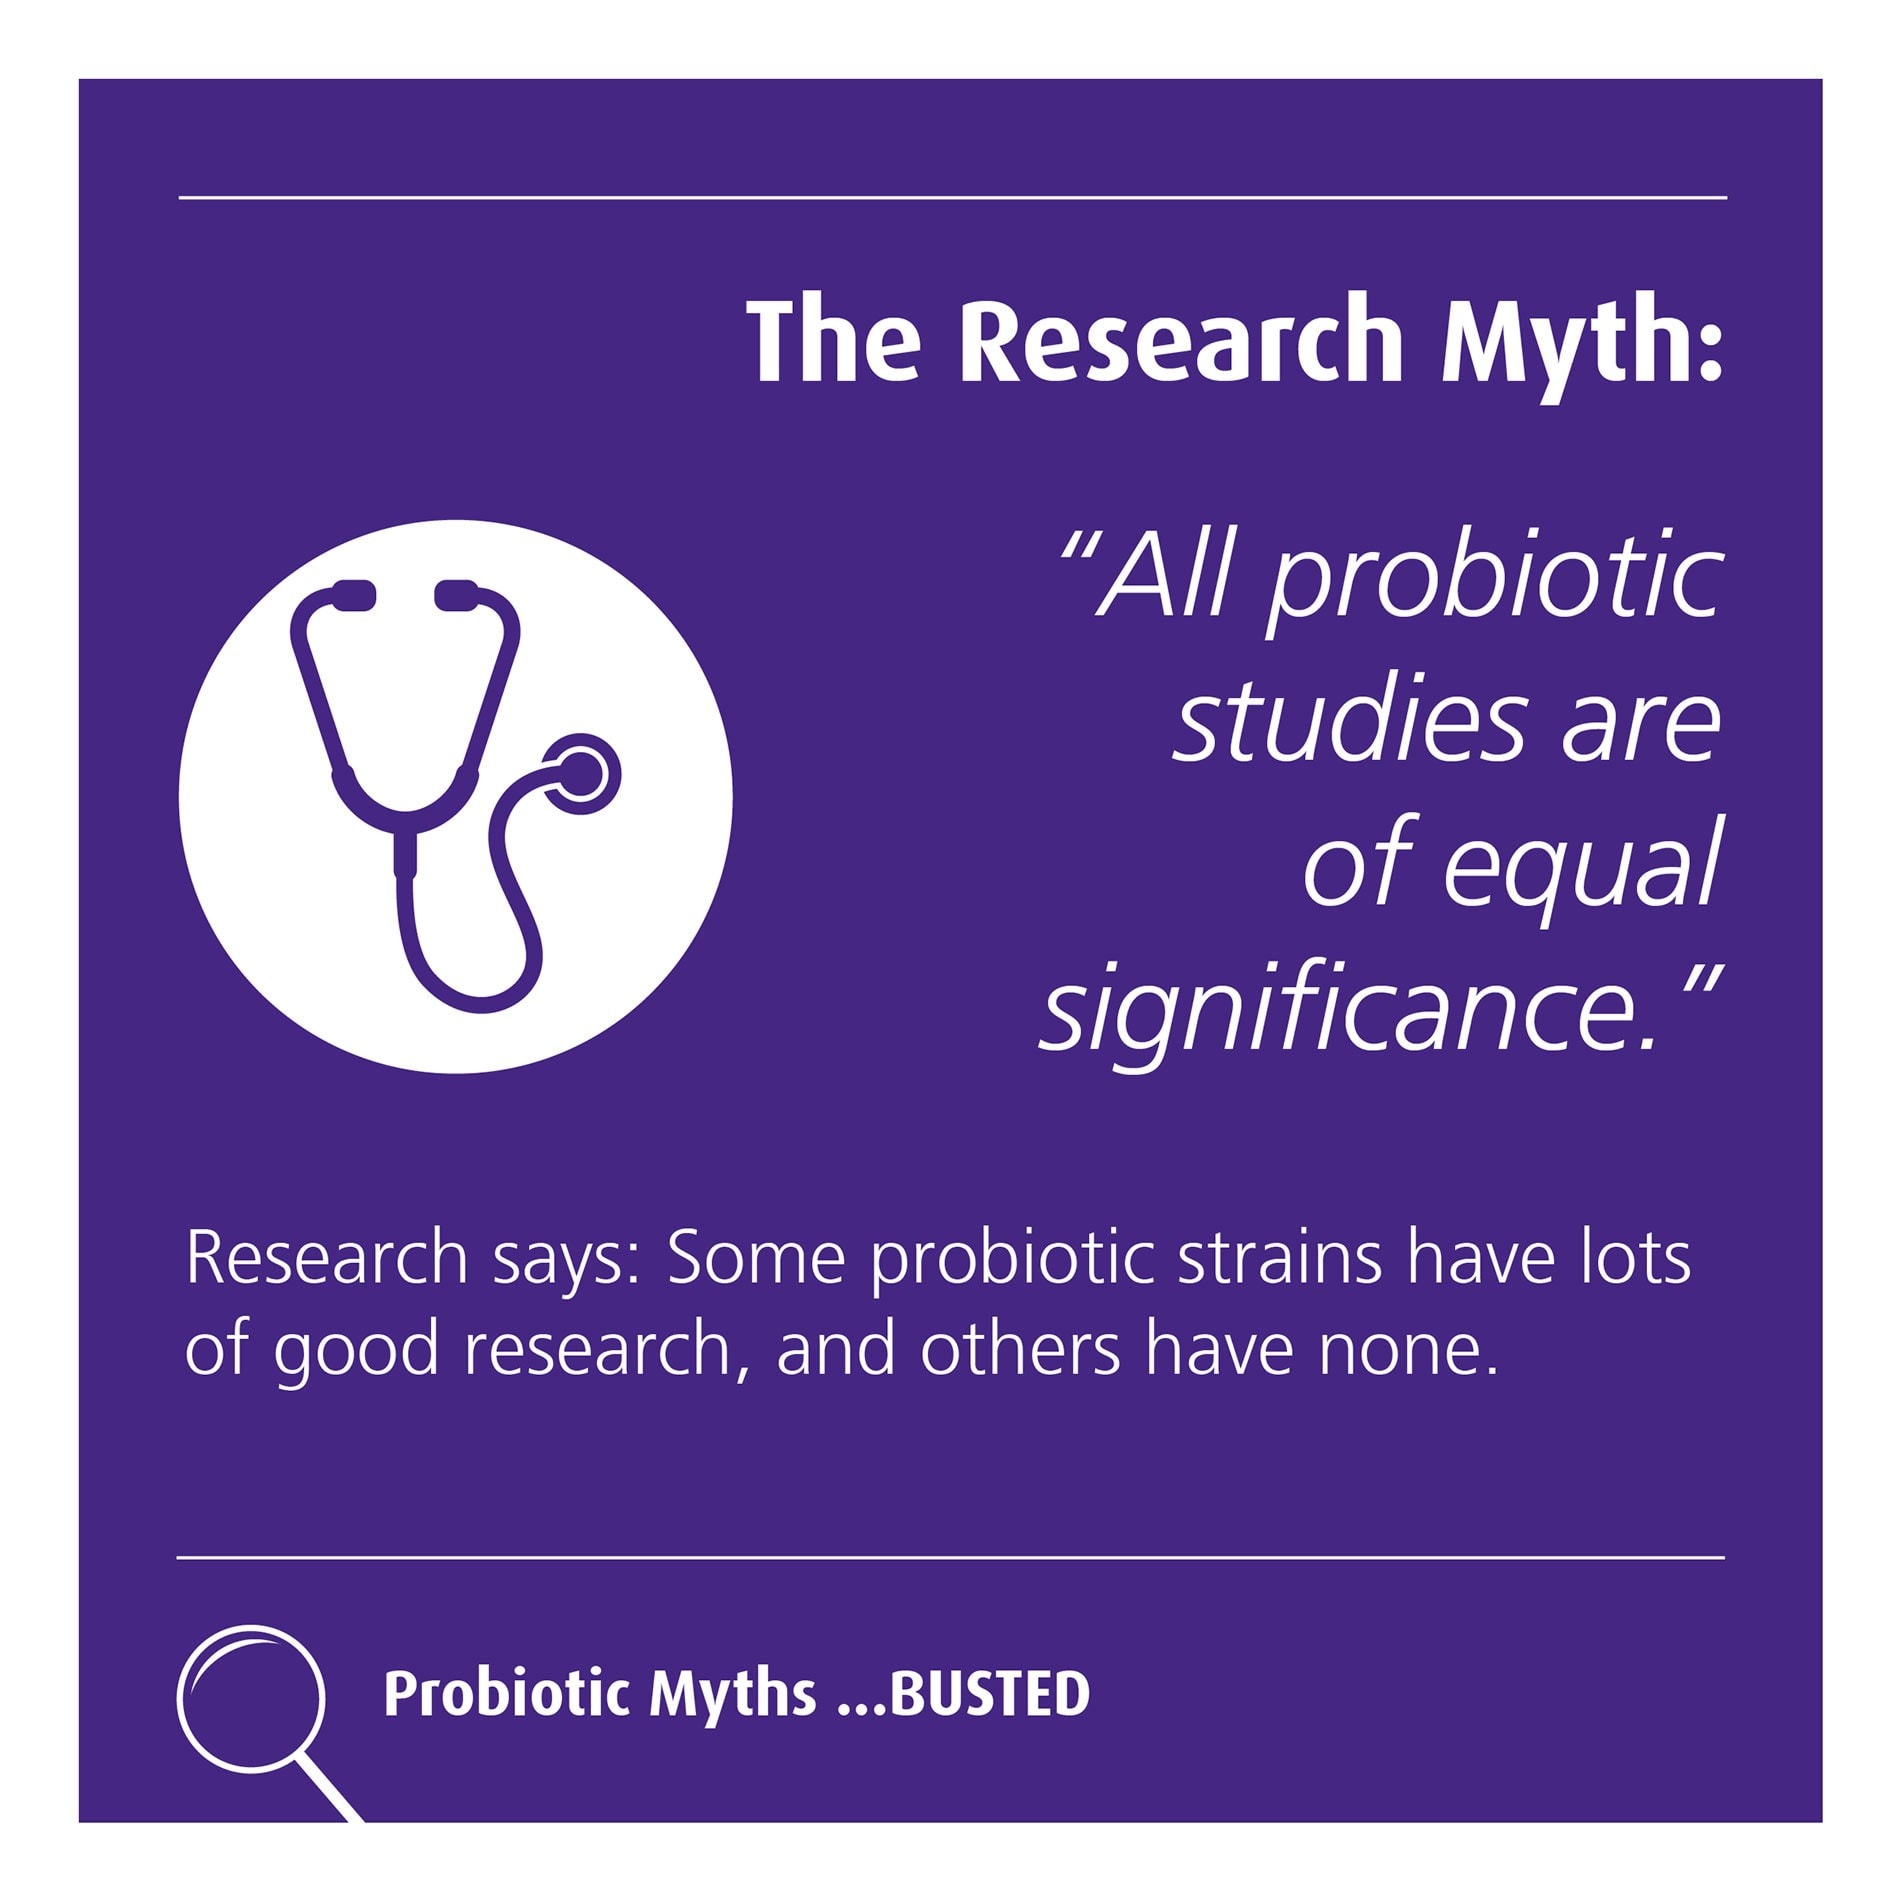 The research myth